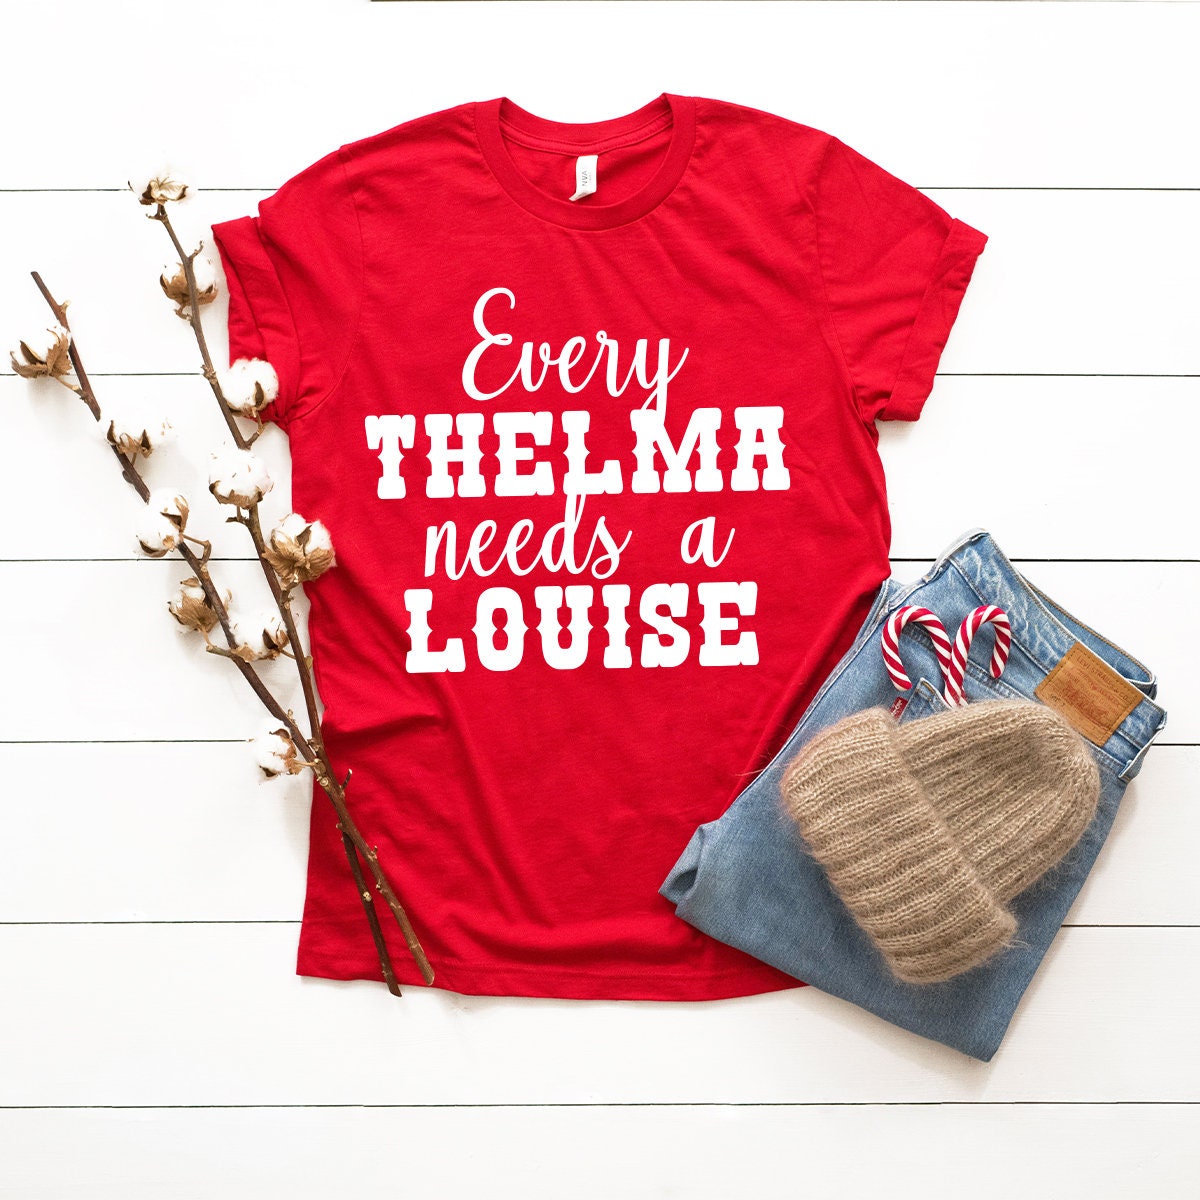 Thelma Not Louise T-Shirt